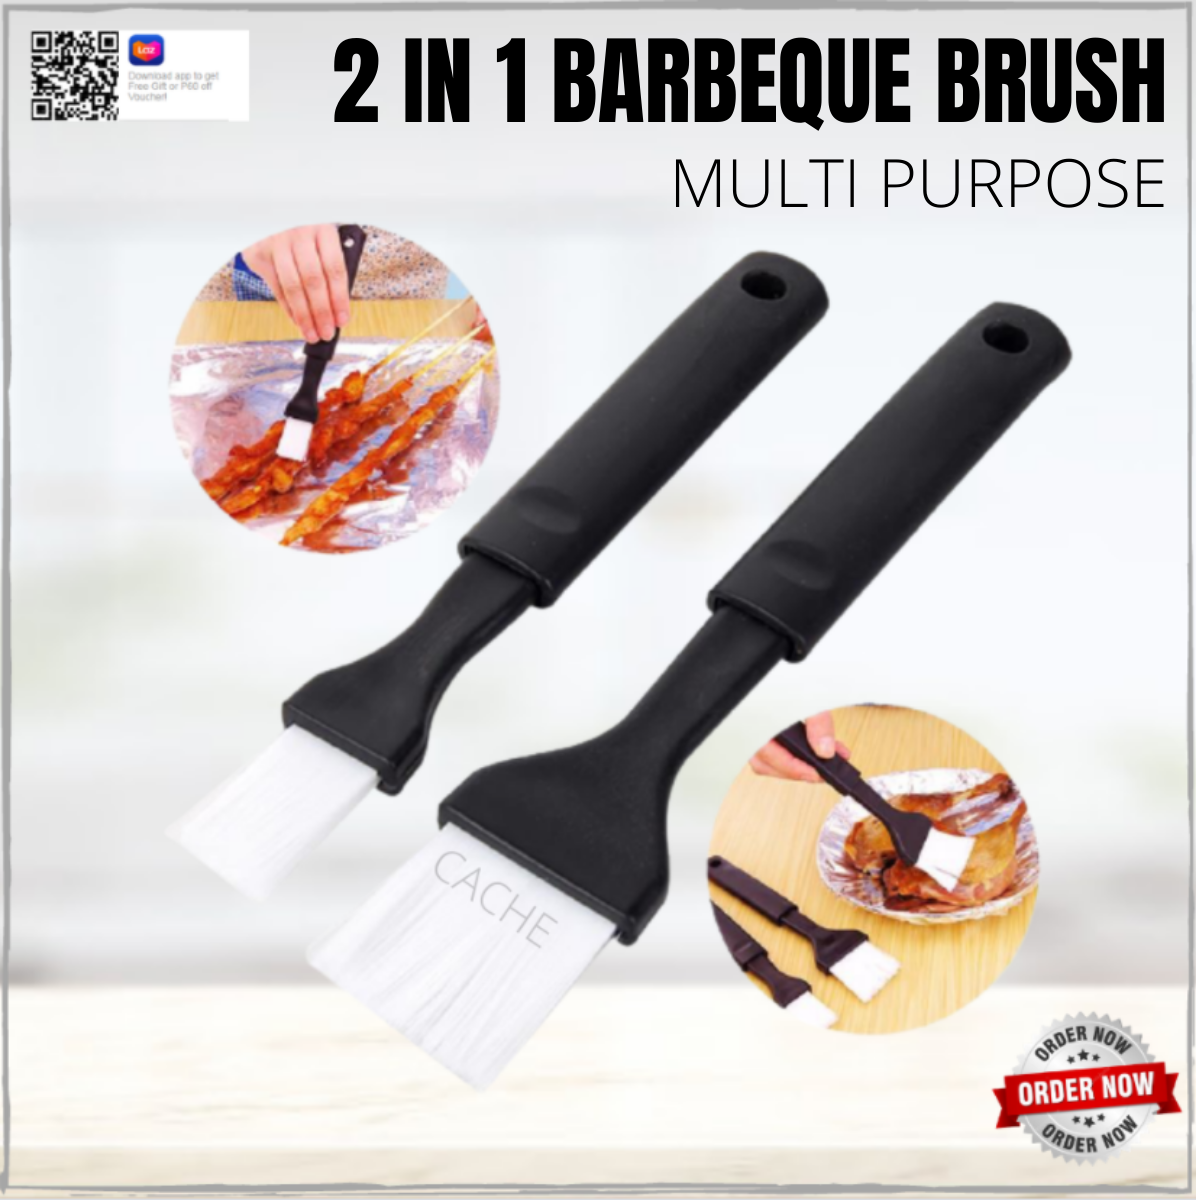  Exceliy 2 Sets Pastry Brushes with Wooden Handle